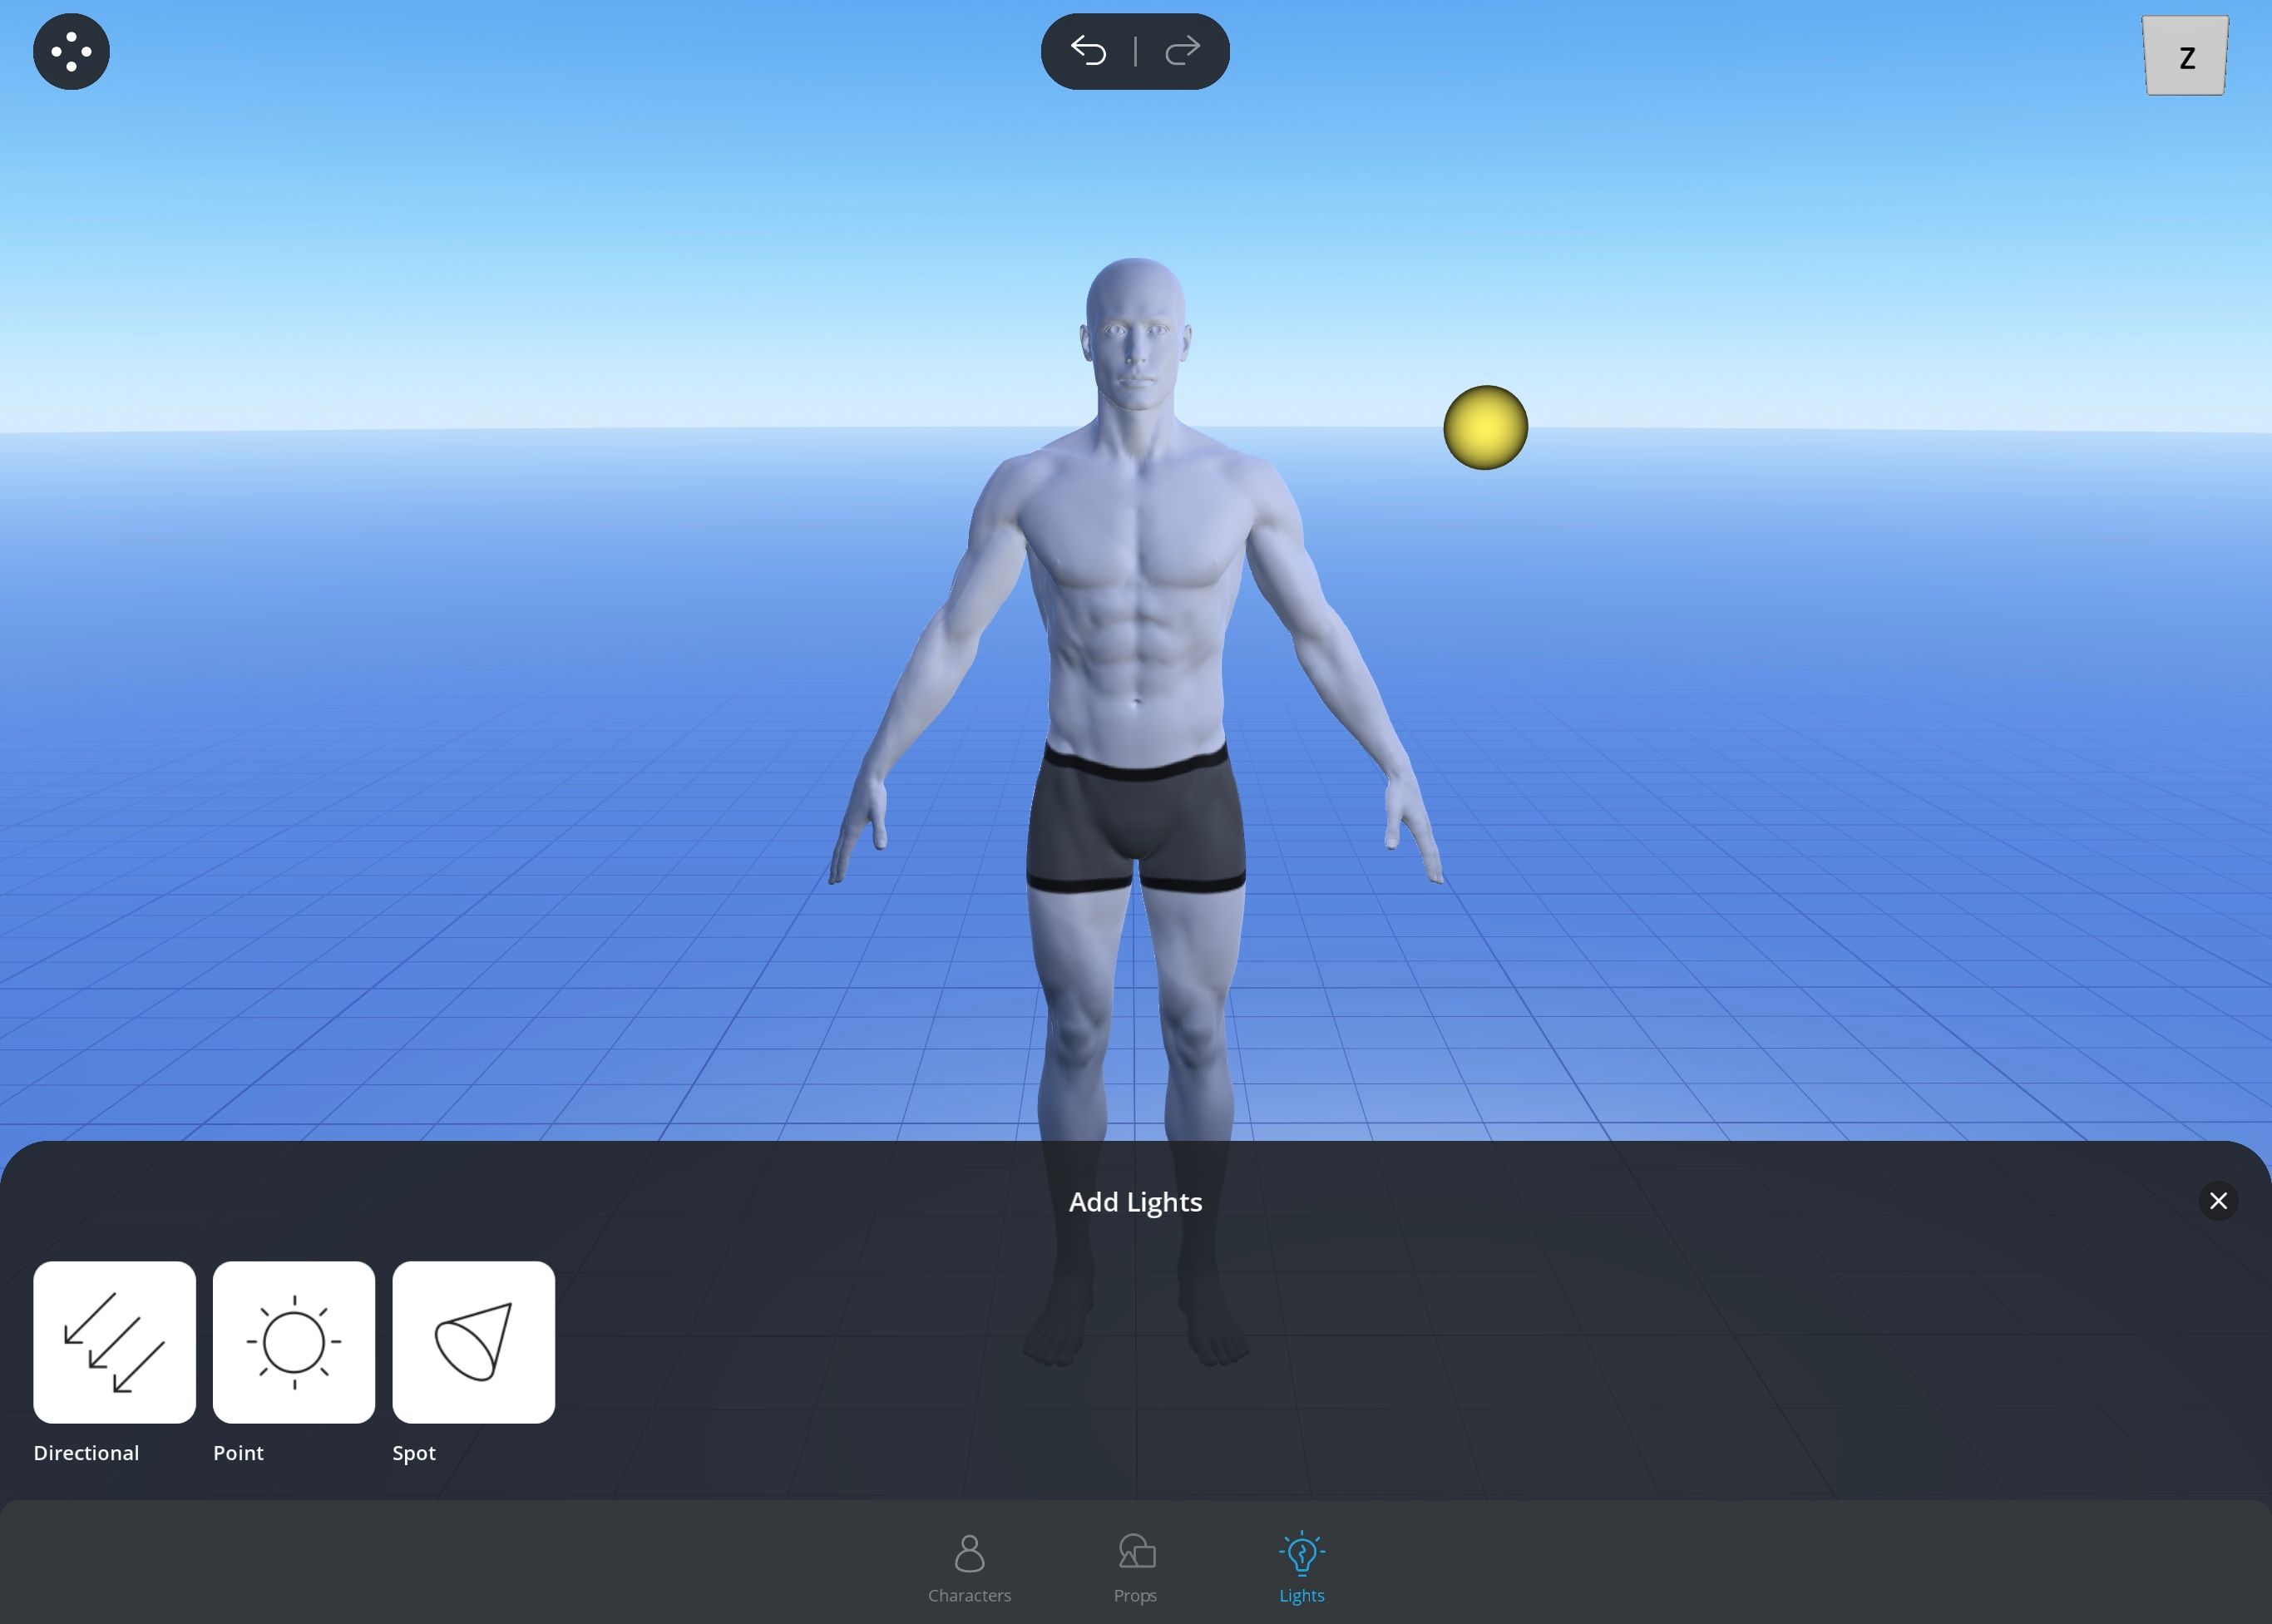 3D model of man with menu displaying light options in Magic Poser